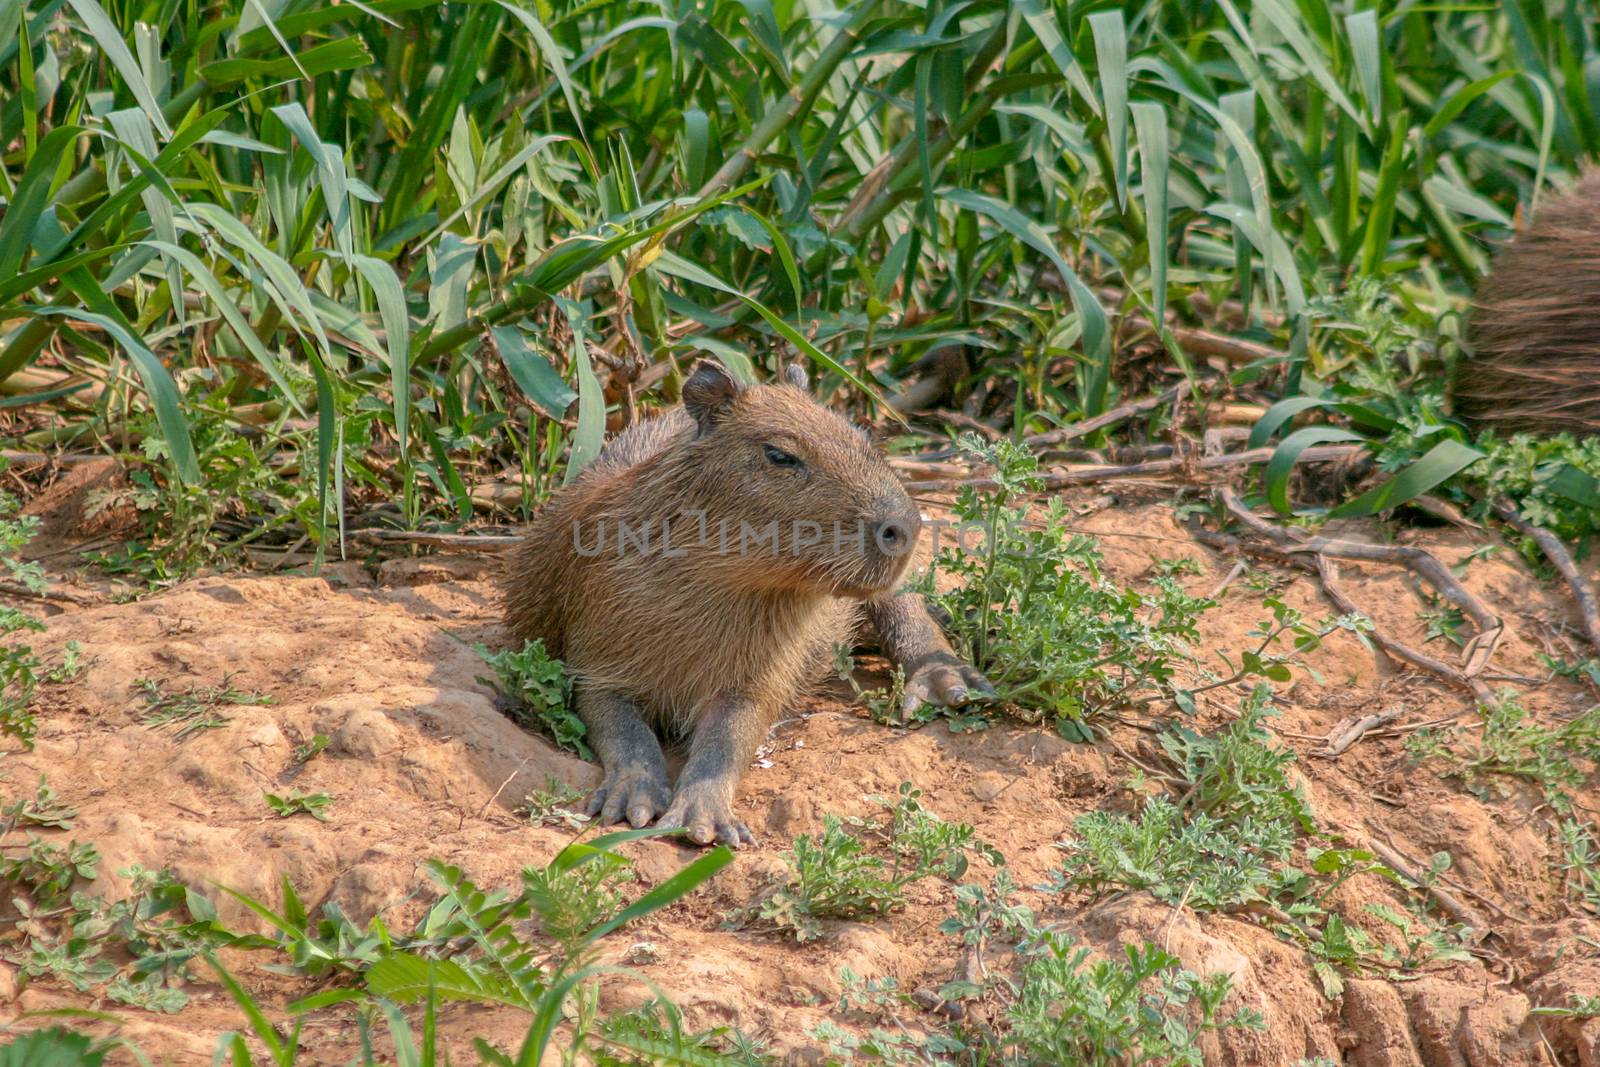 Capybaras in the Pantanal region of Brazil by magicbones